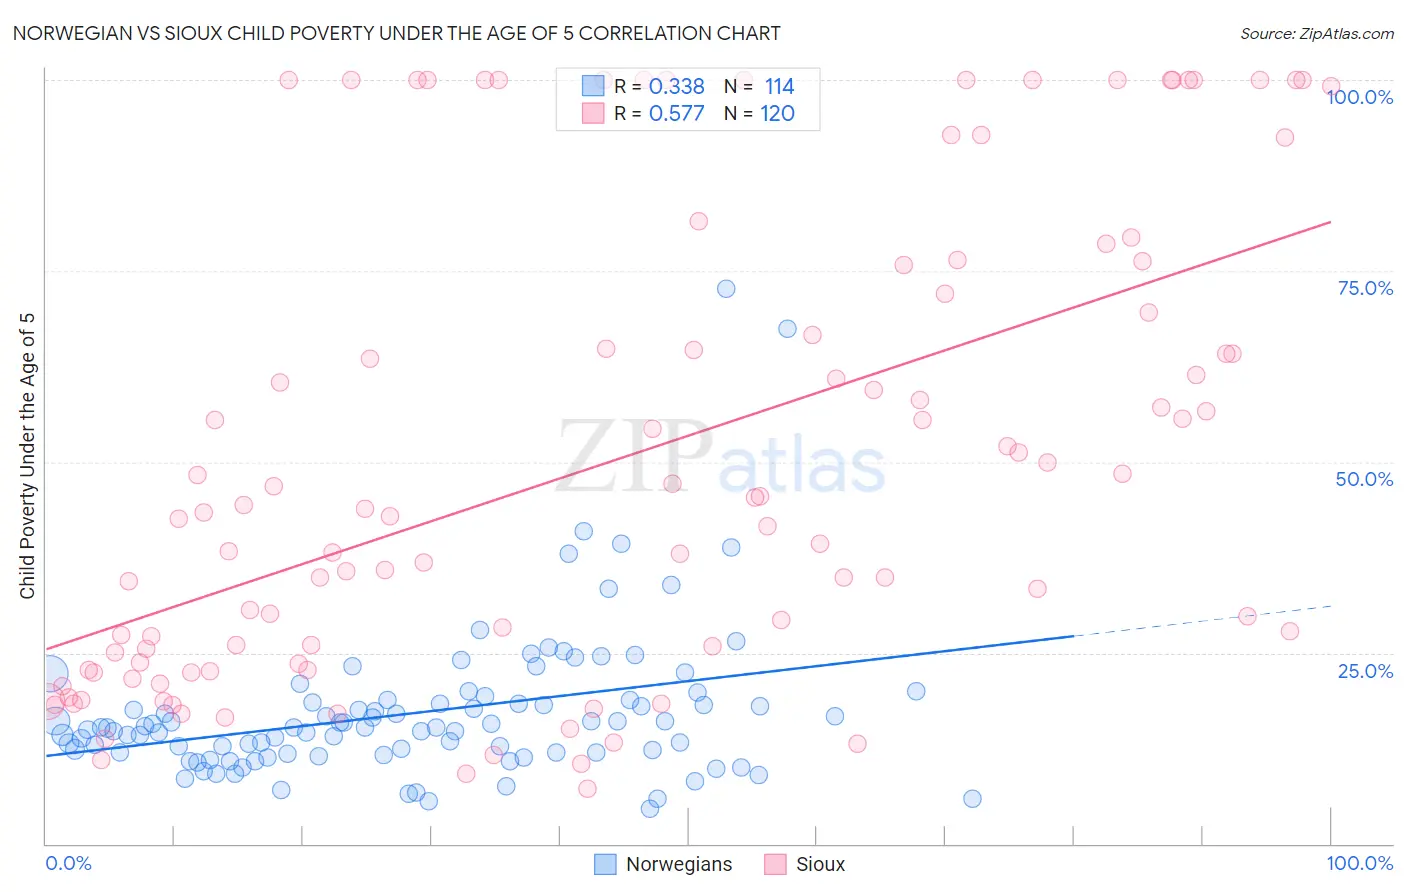 Norwegian vs Sioux Child Poverty Under the Age of 5